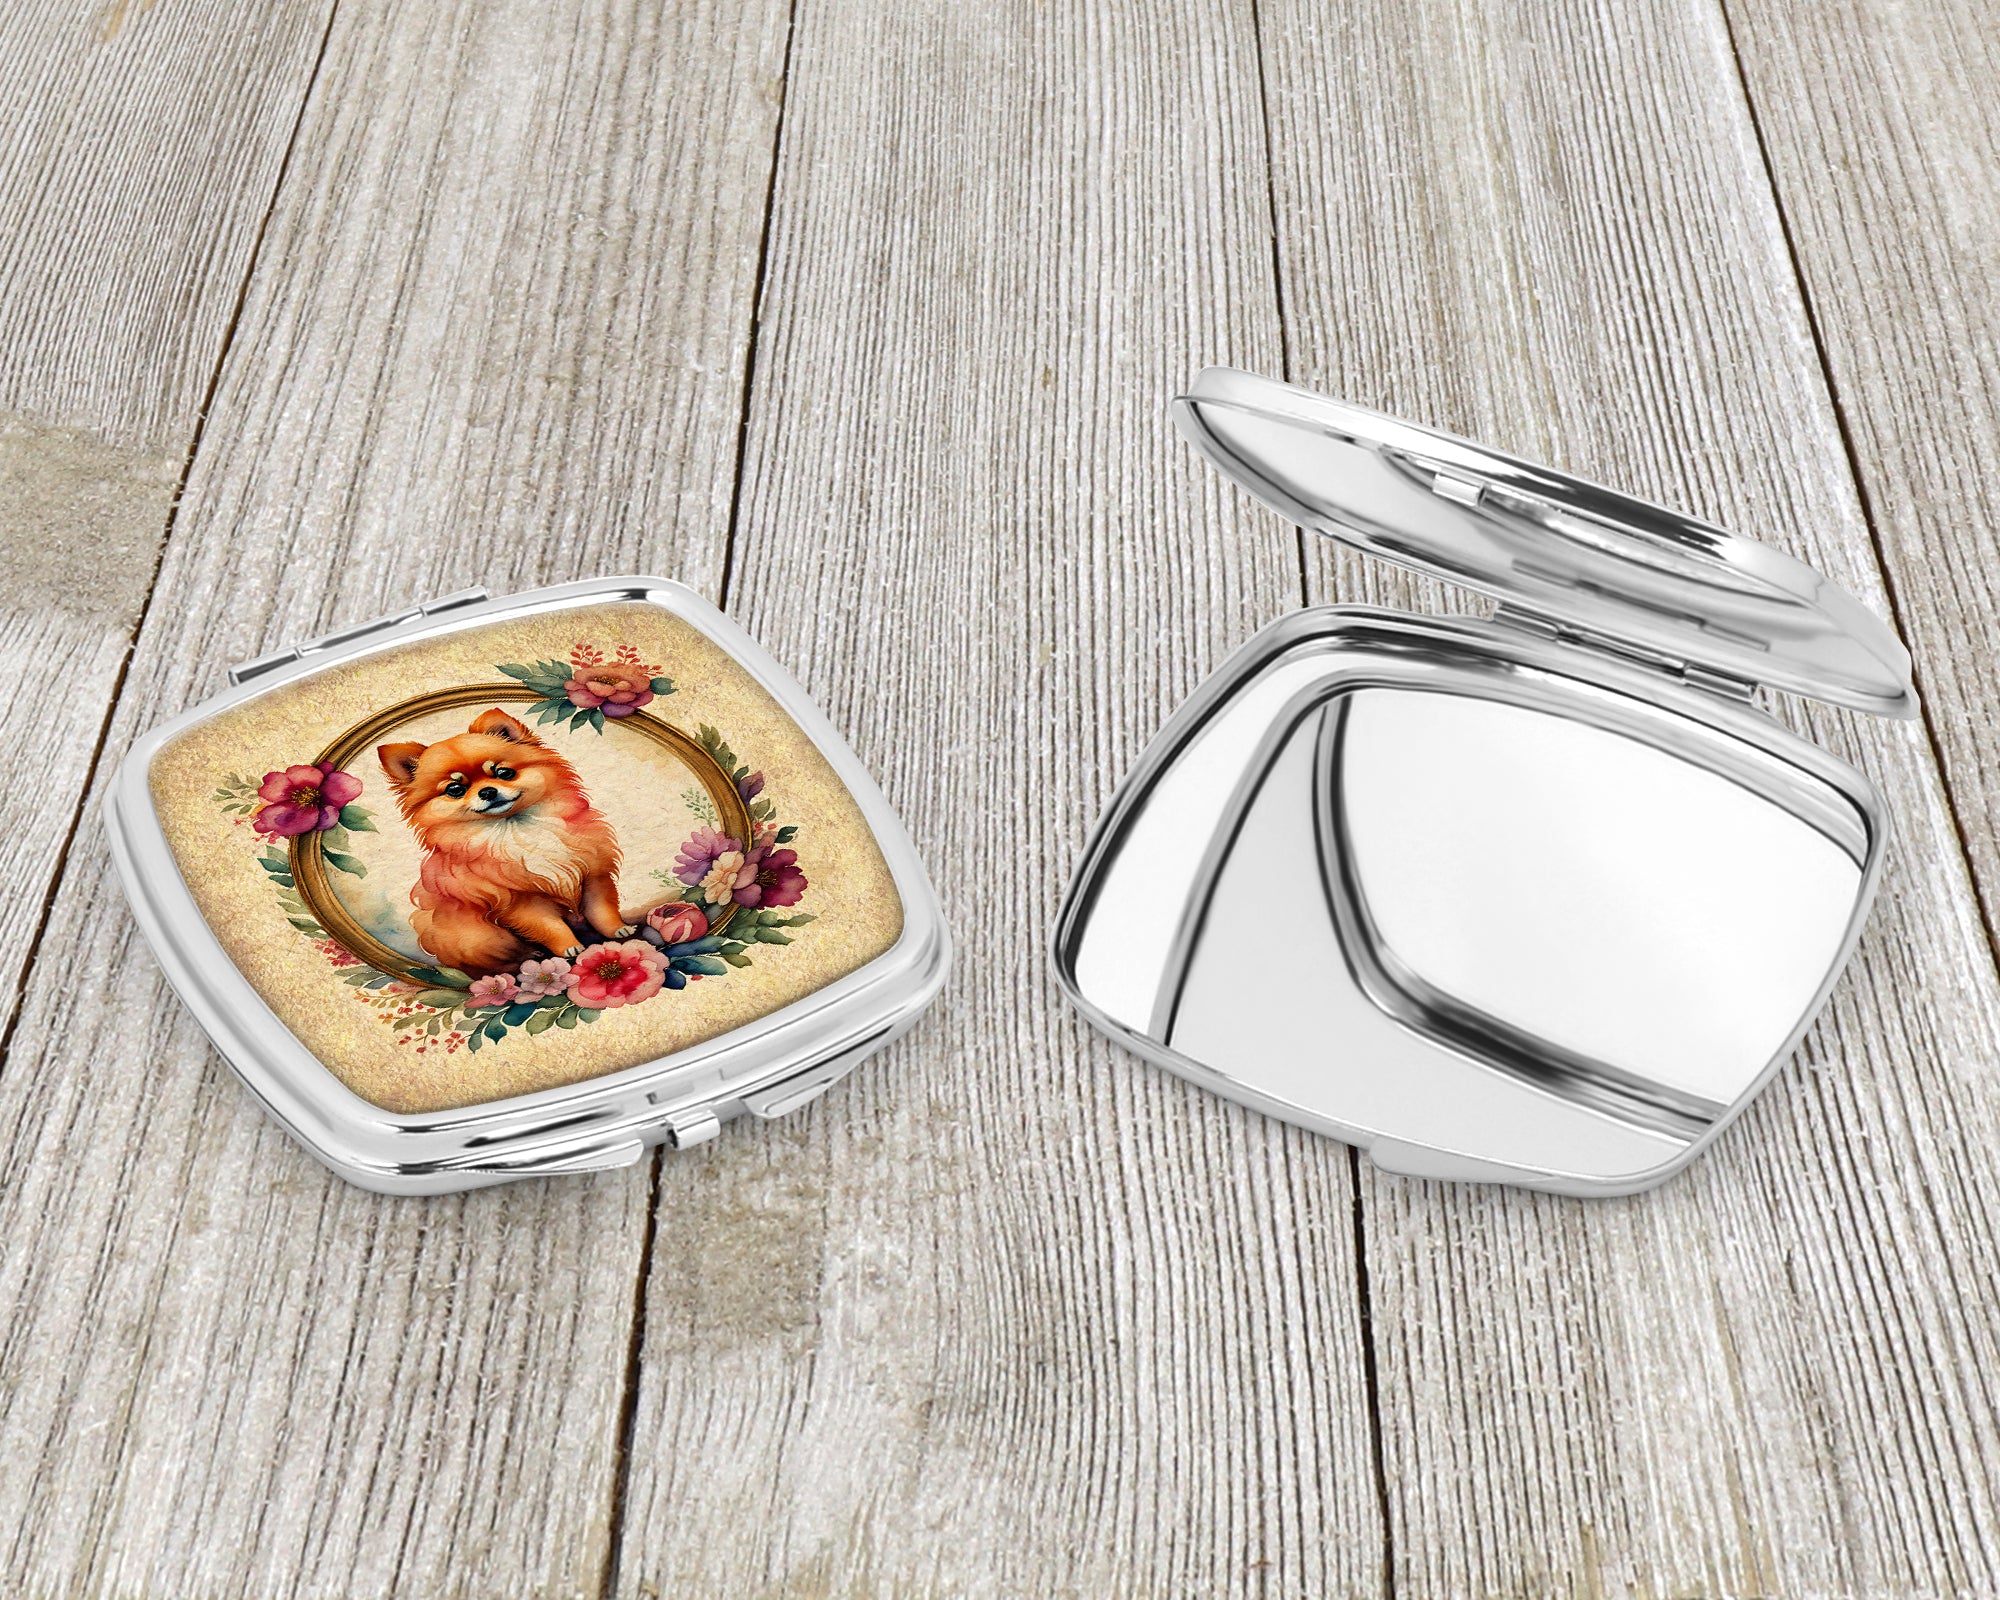 Pomeranian and Flowers Compact Mirror